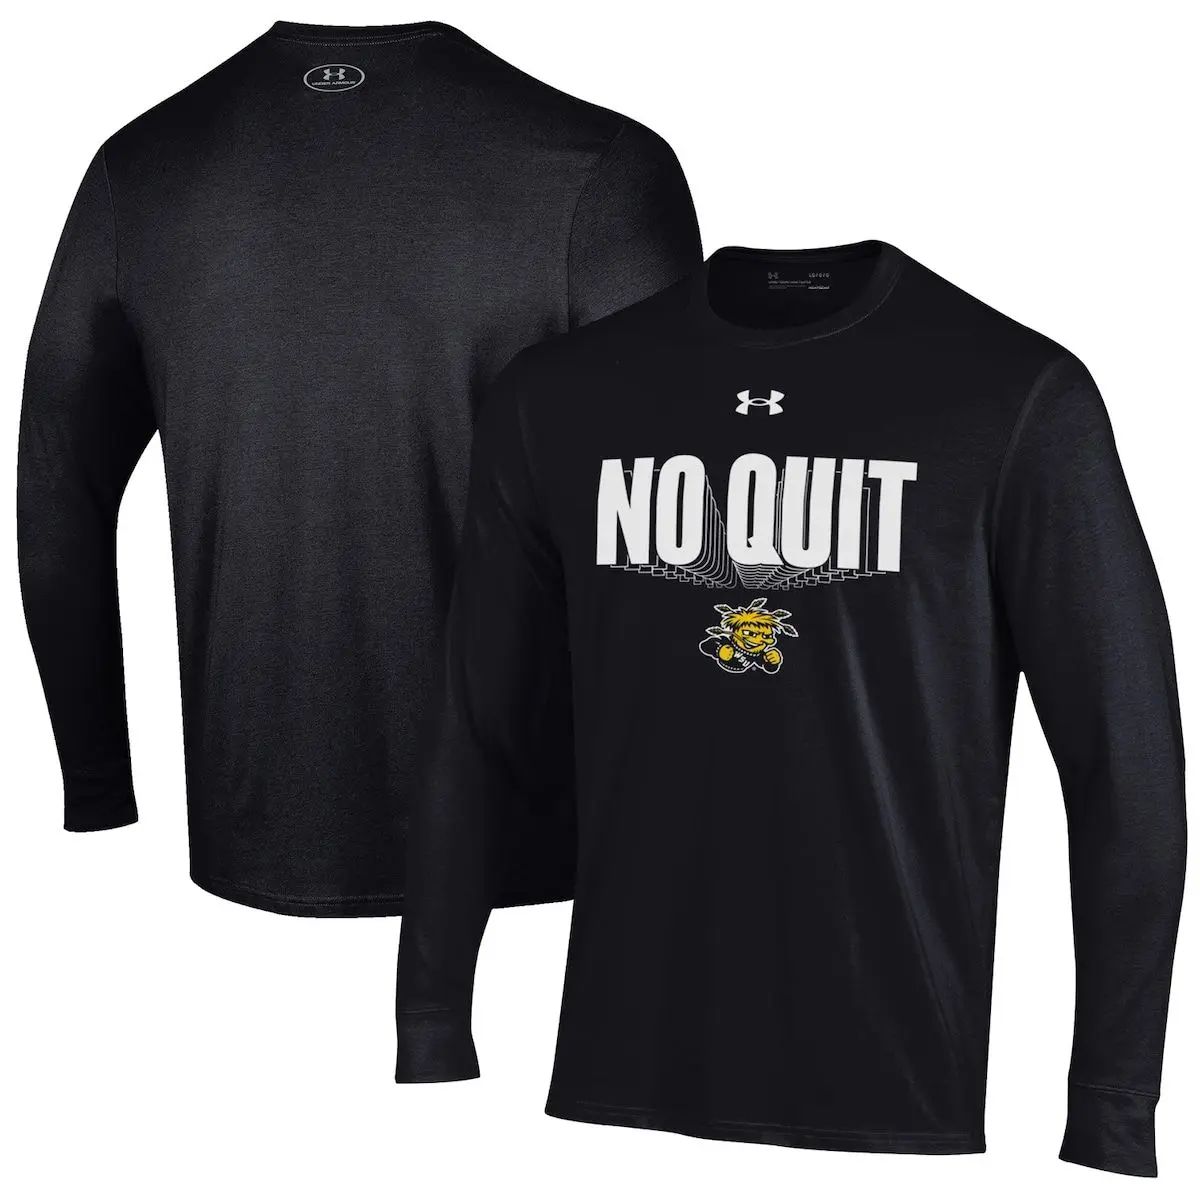 Men's Under Armour Black Wichita State Shockers Shooter Performance Long Sleeve T-Shirt at Nordstrom | Nordstrom